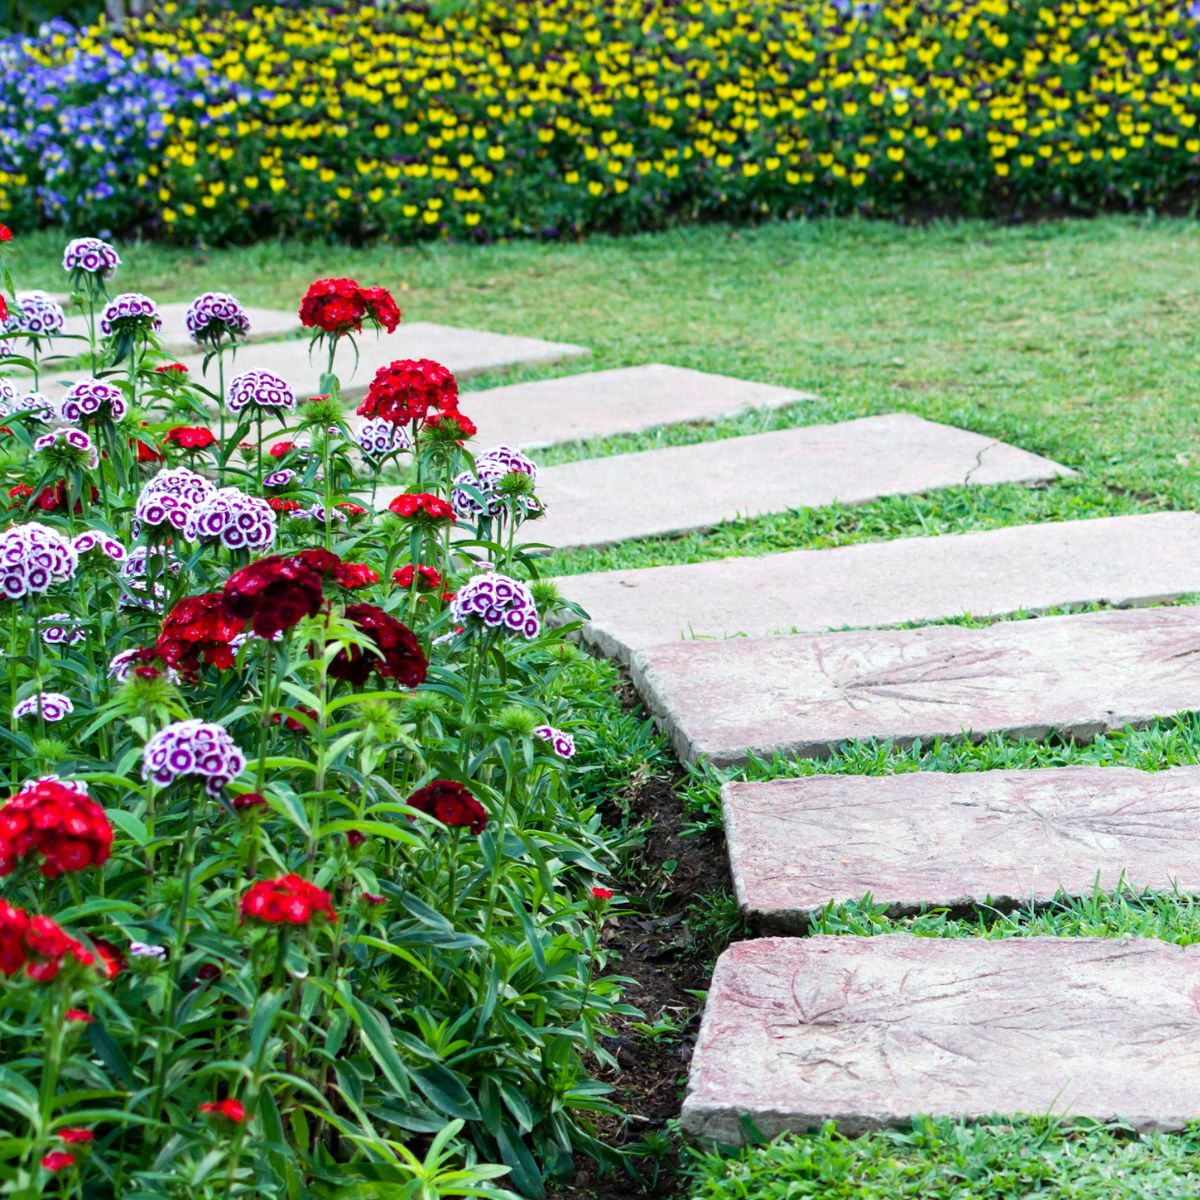 Walkway made form slabs, and surrounded by bright colored flowers.